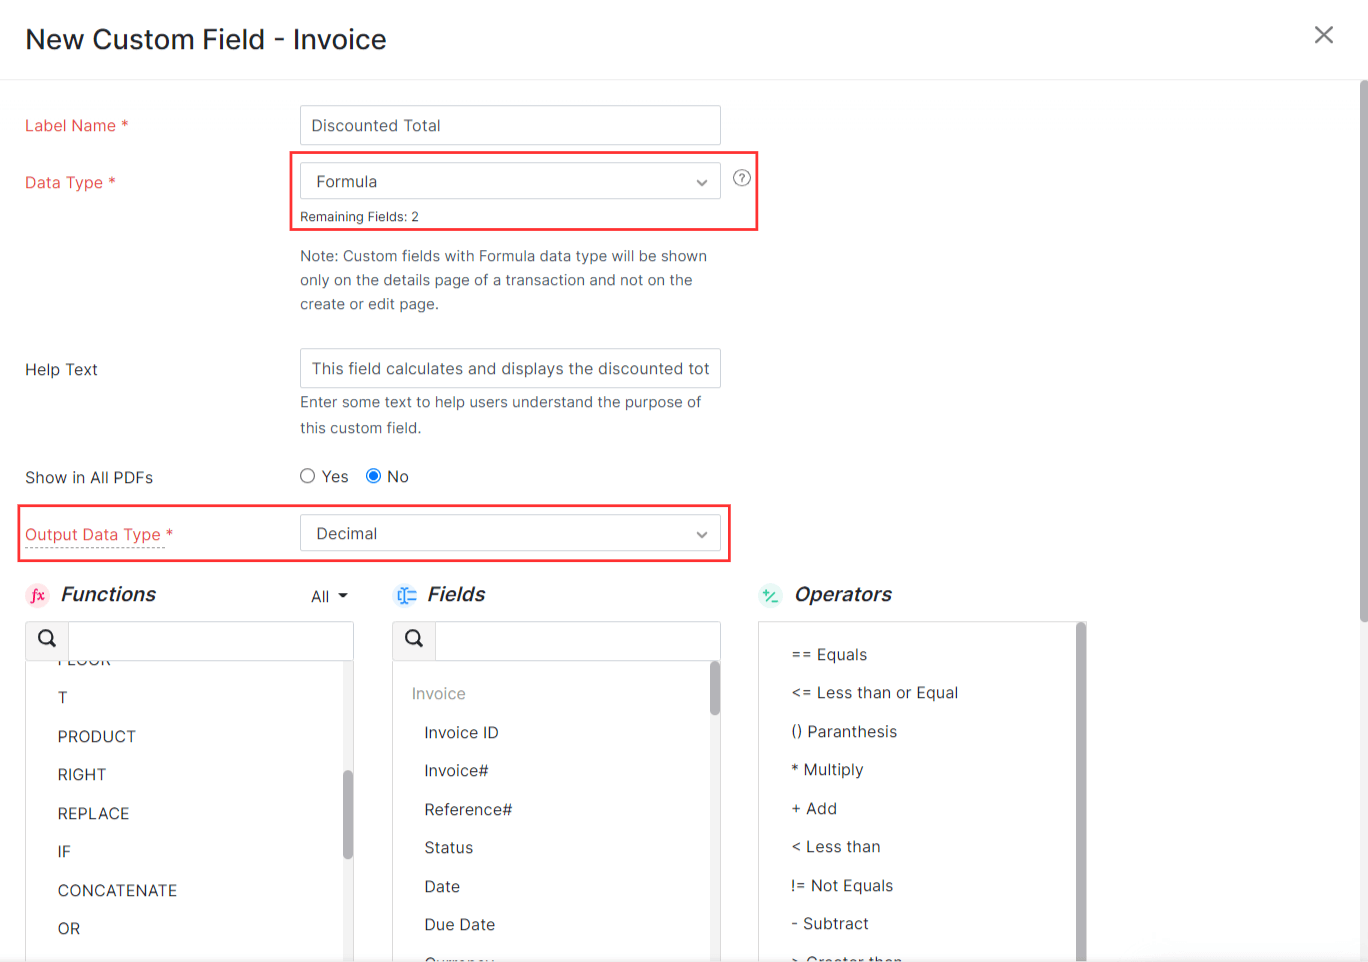 Select Formula as the data type